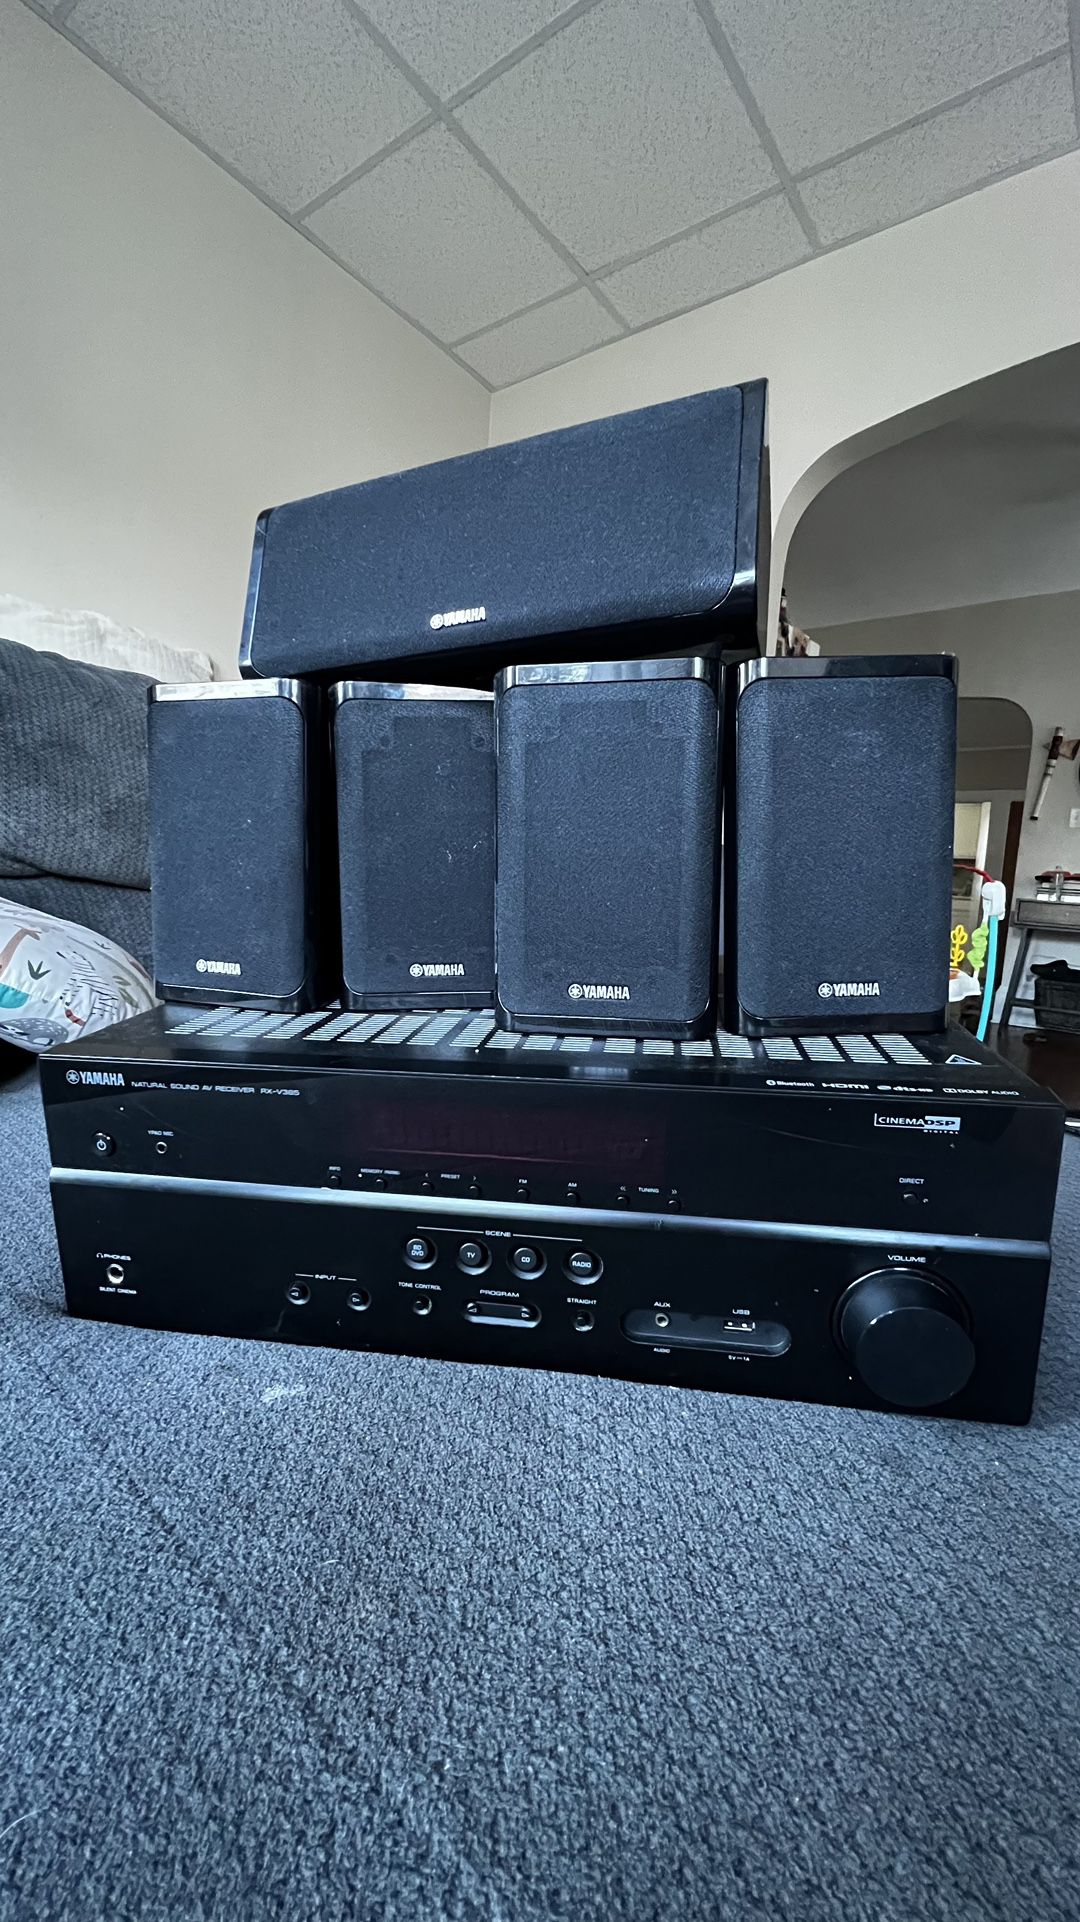 Receiver Yamaha With Speakers 